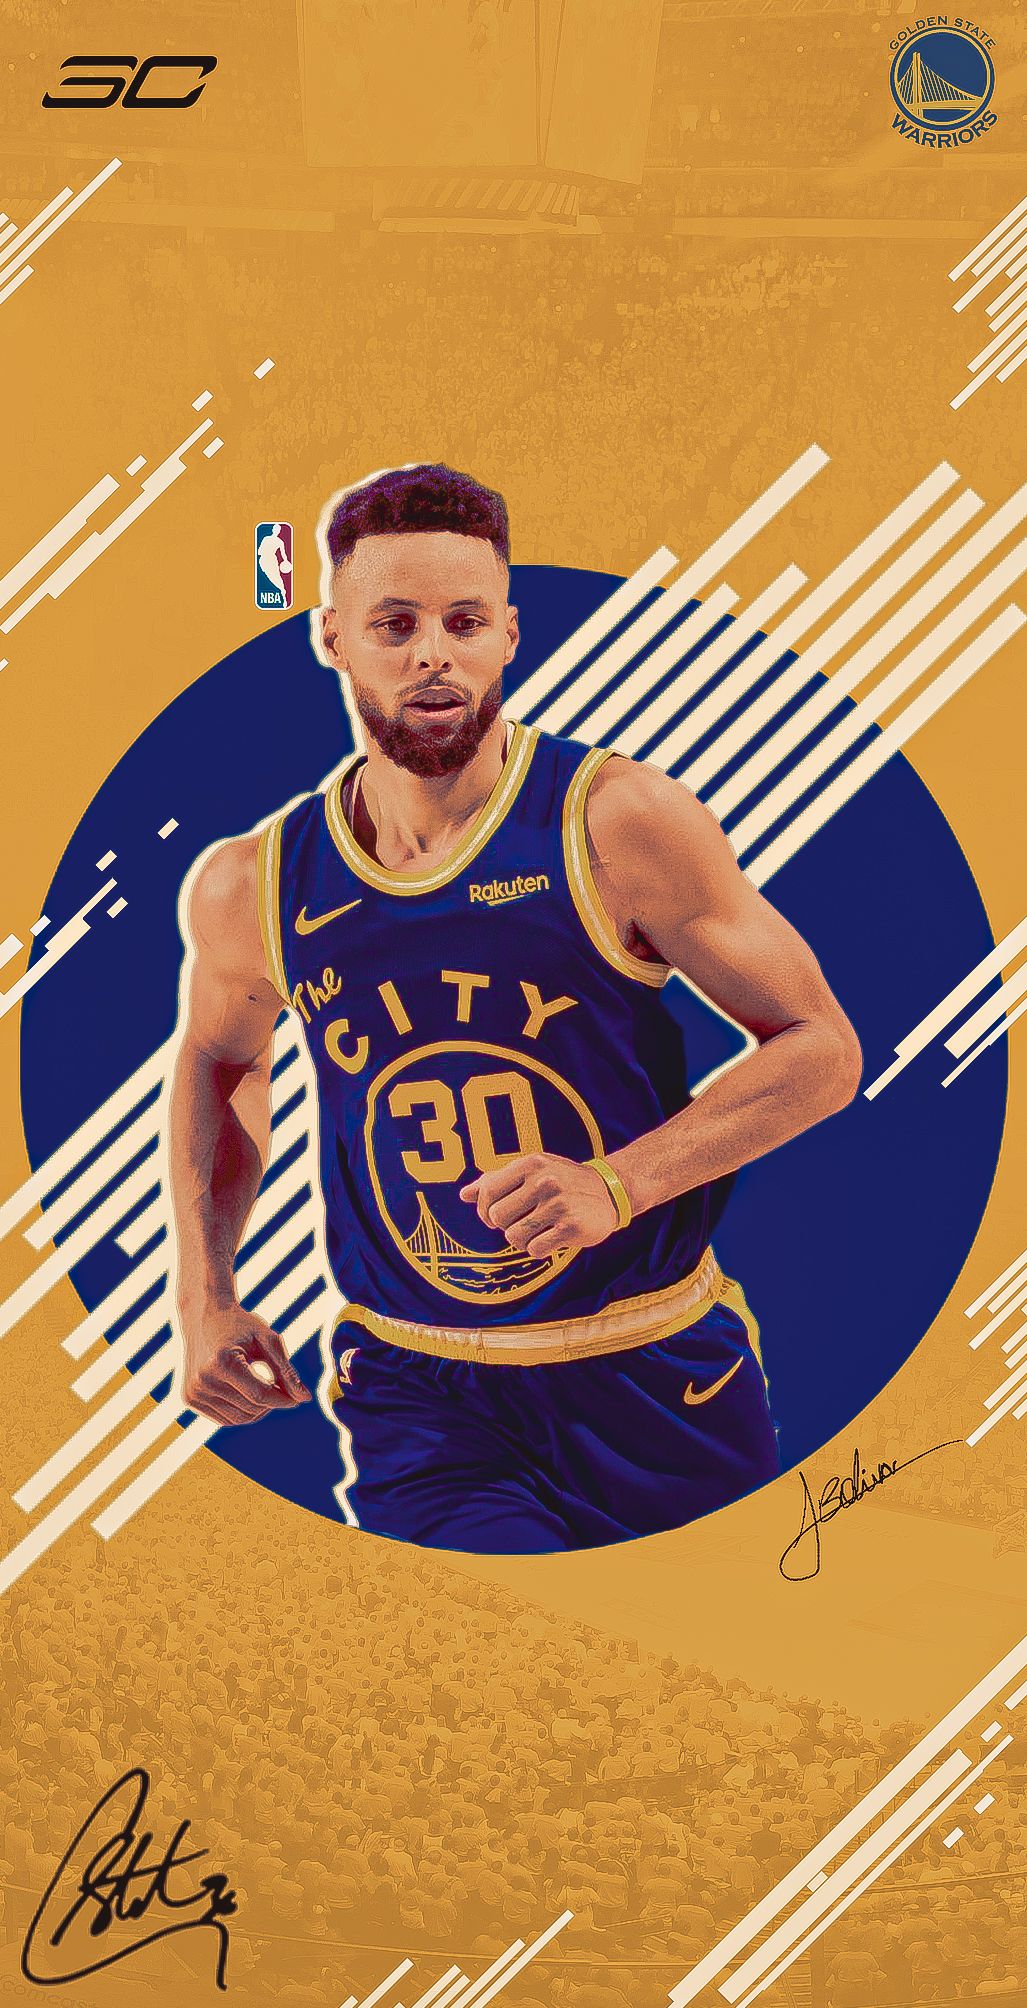 Stephen Curry Wallpaper Discover more background, Basketball, cool, fire, iphone wallpaper.. Curry wallpaper, Stephen curry wallpaper, Stephen curry